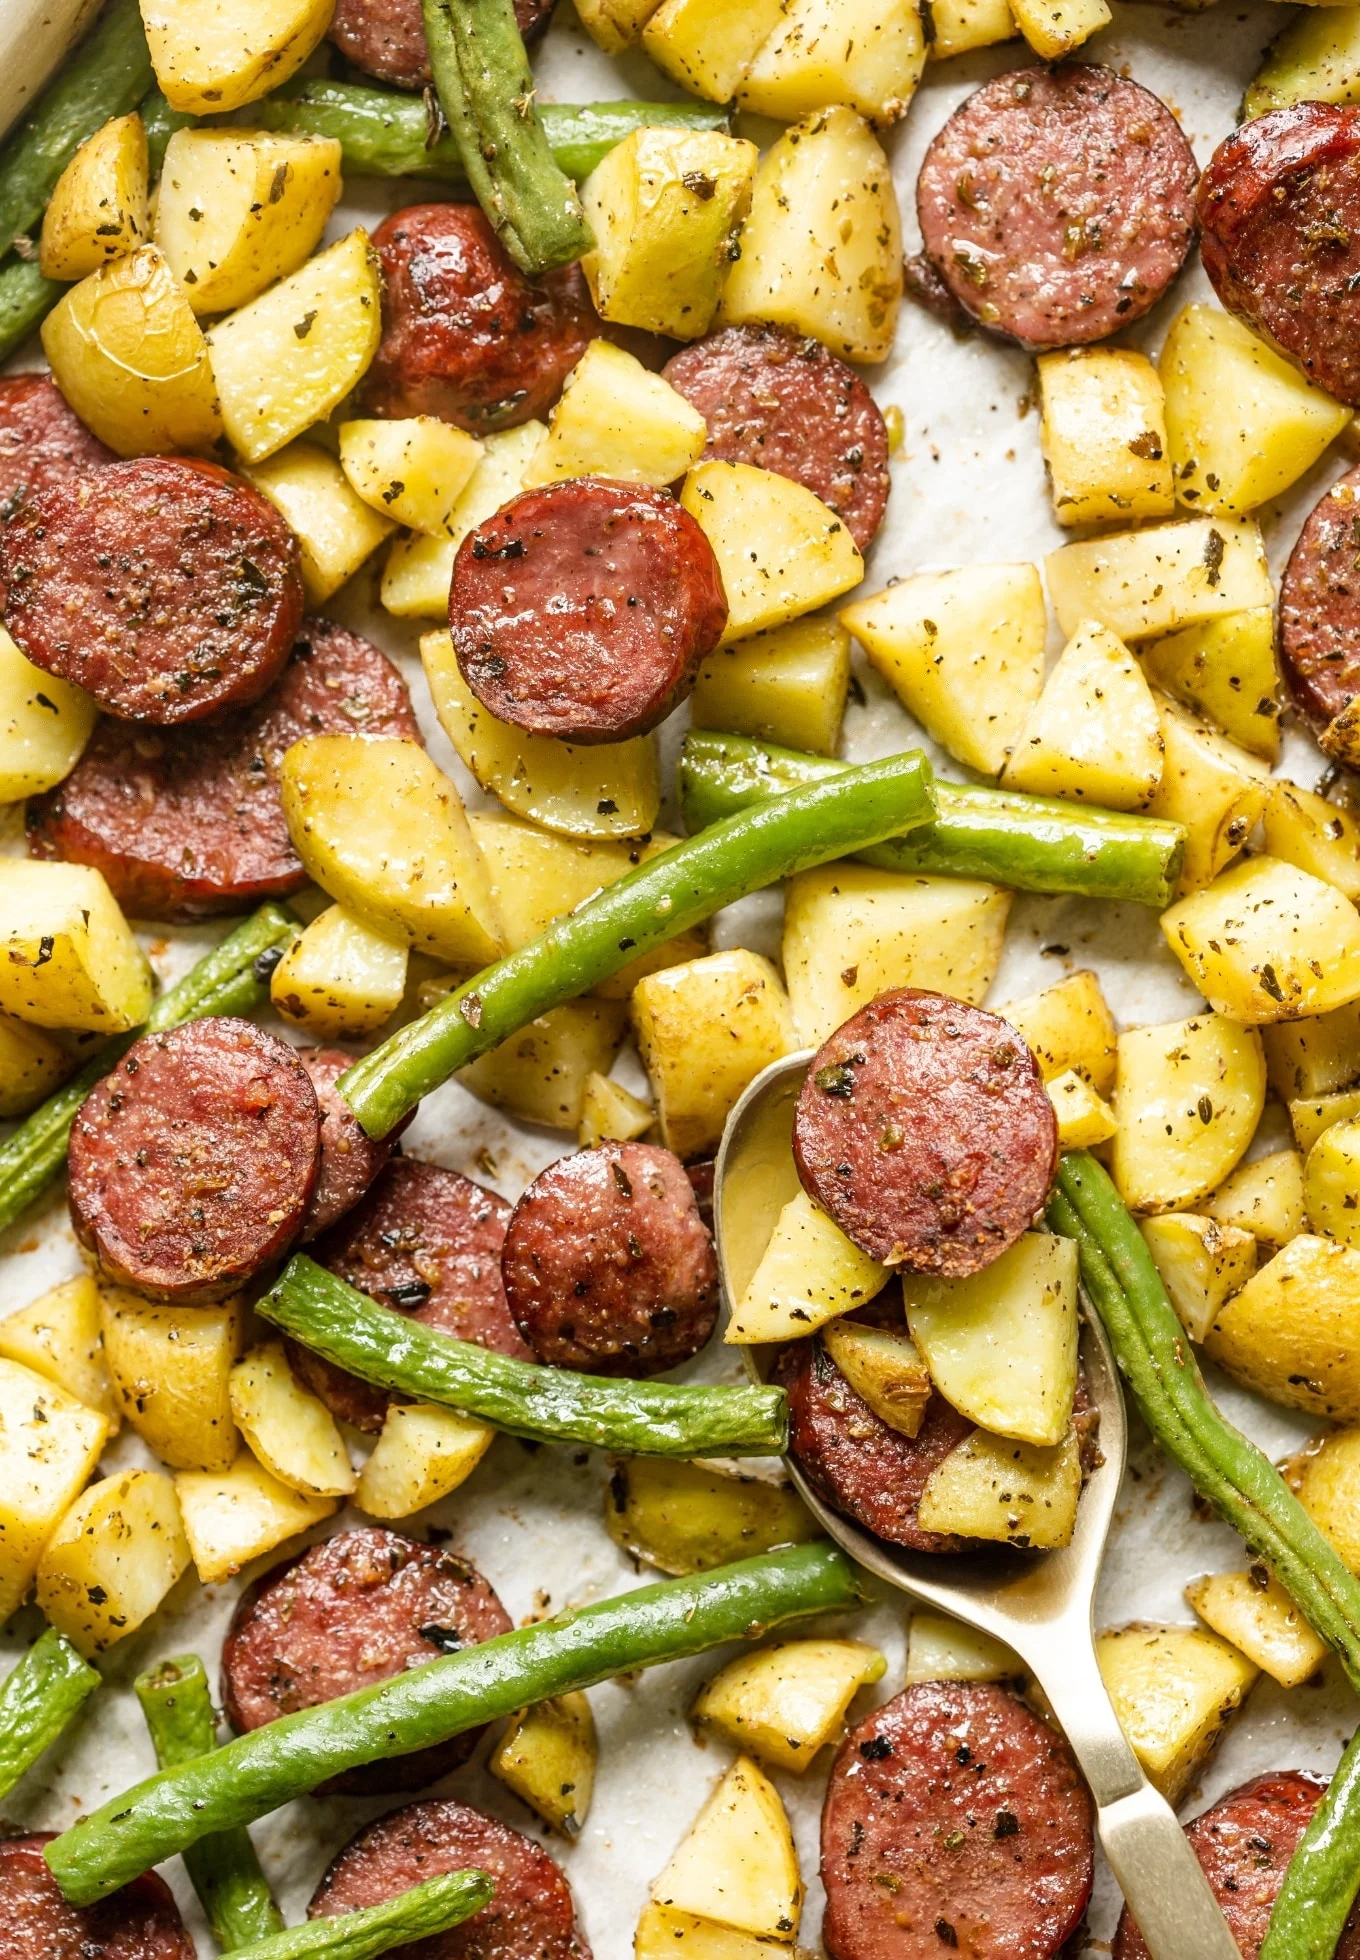 Sausage, potatoes, and green beans all baked together on a single sheet.